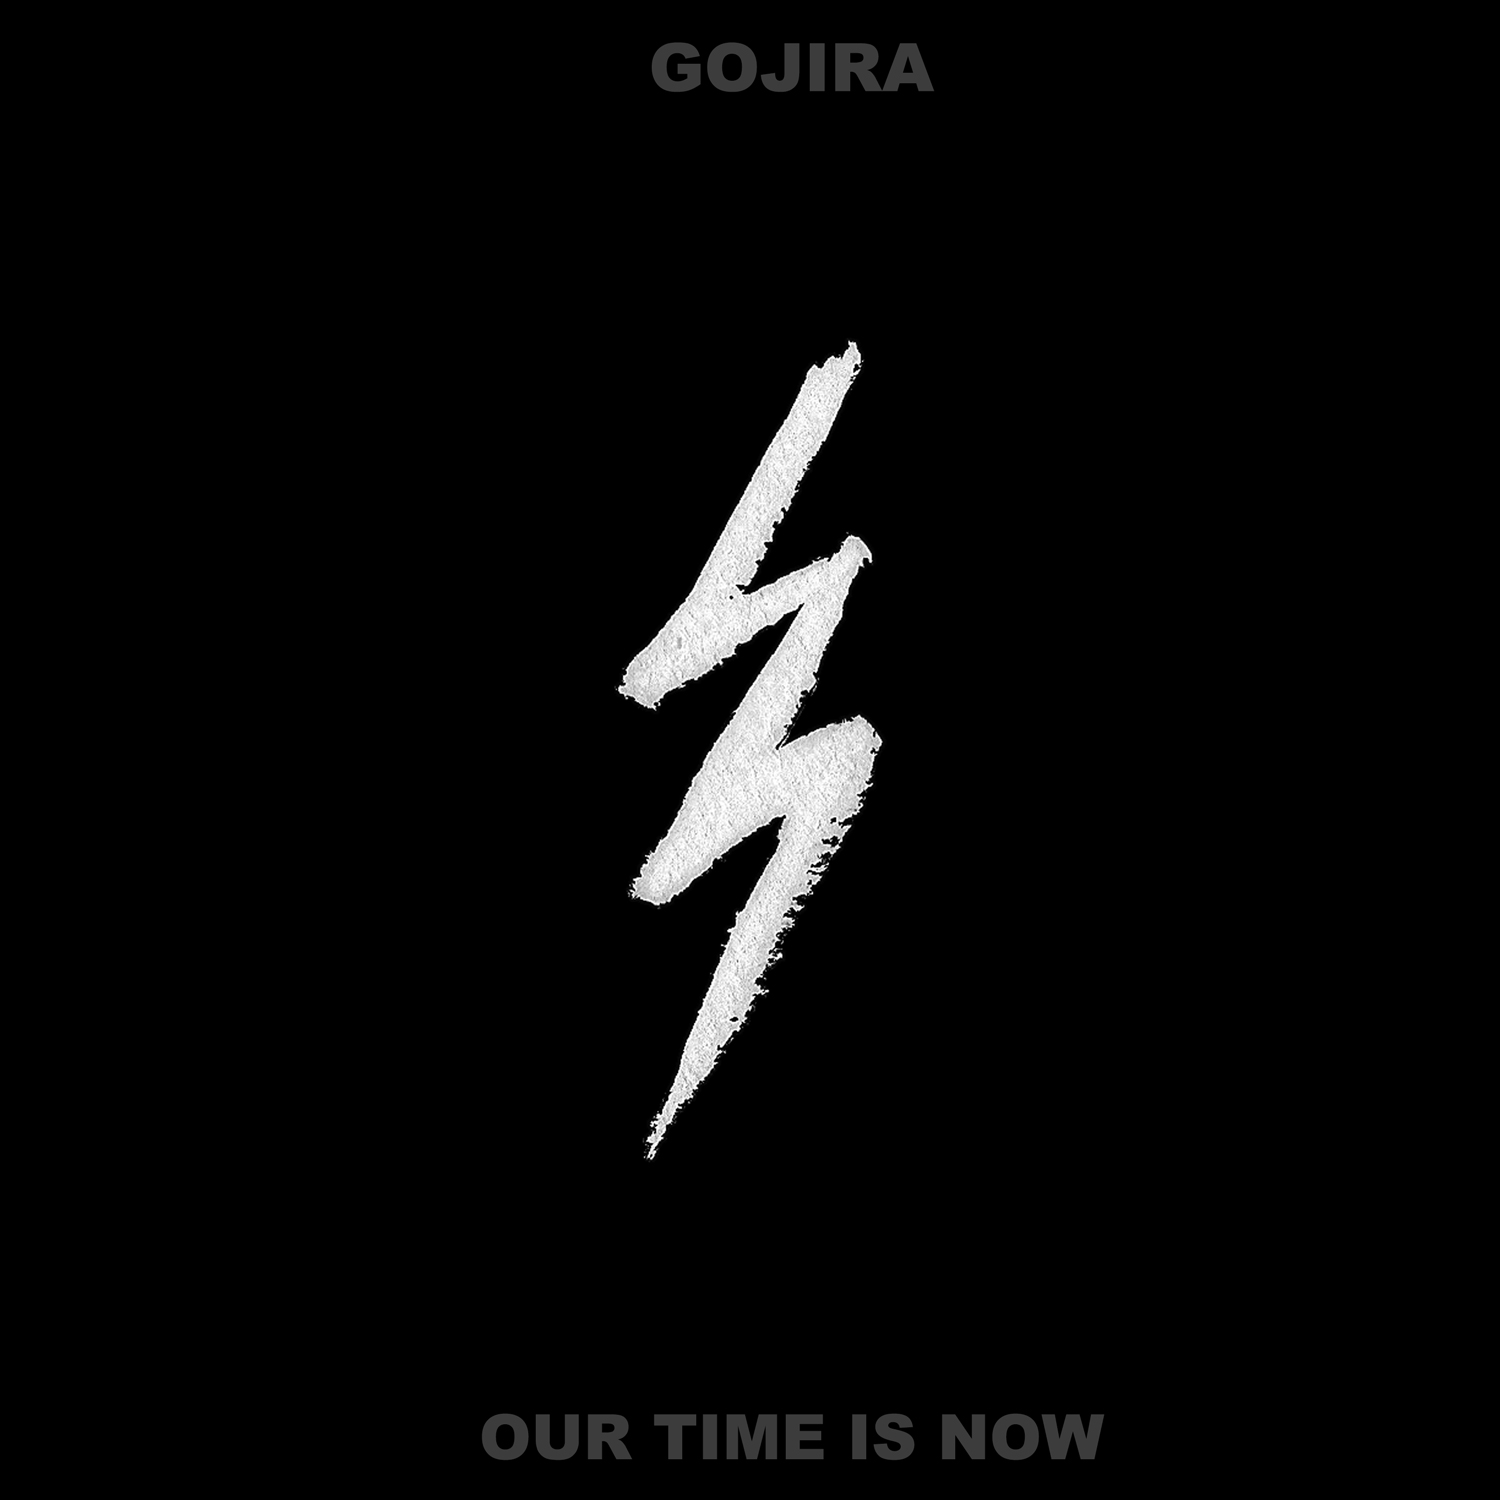 GOJIRA - Our Time is Now cover 